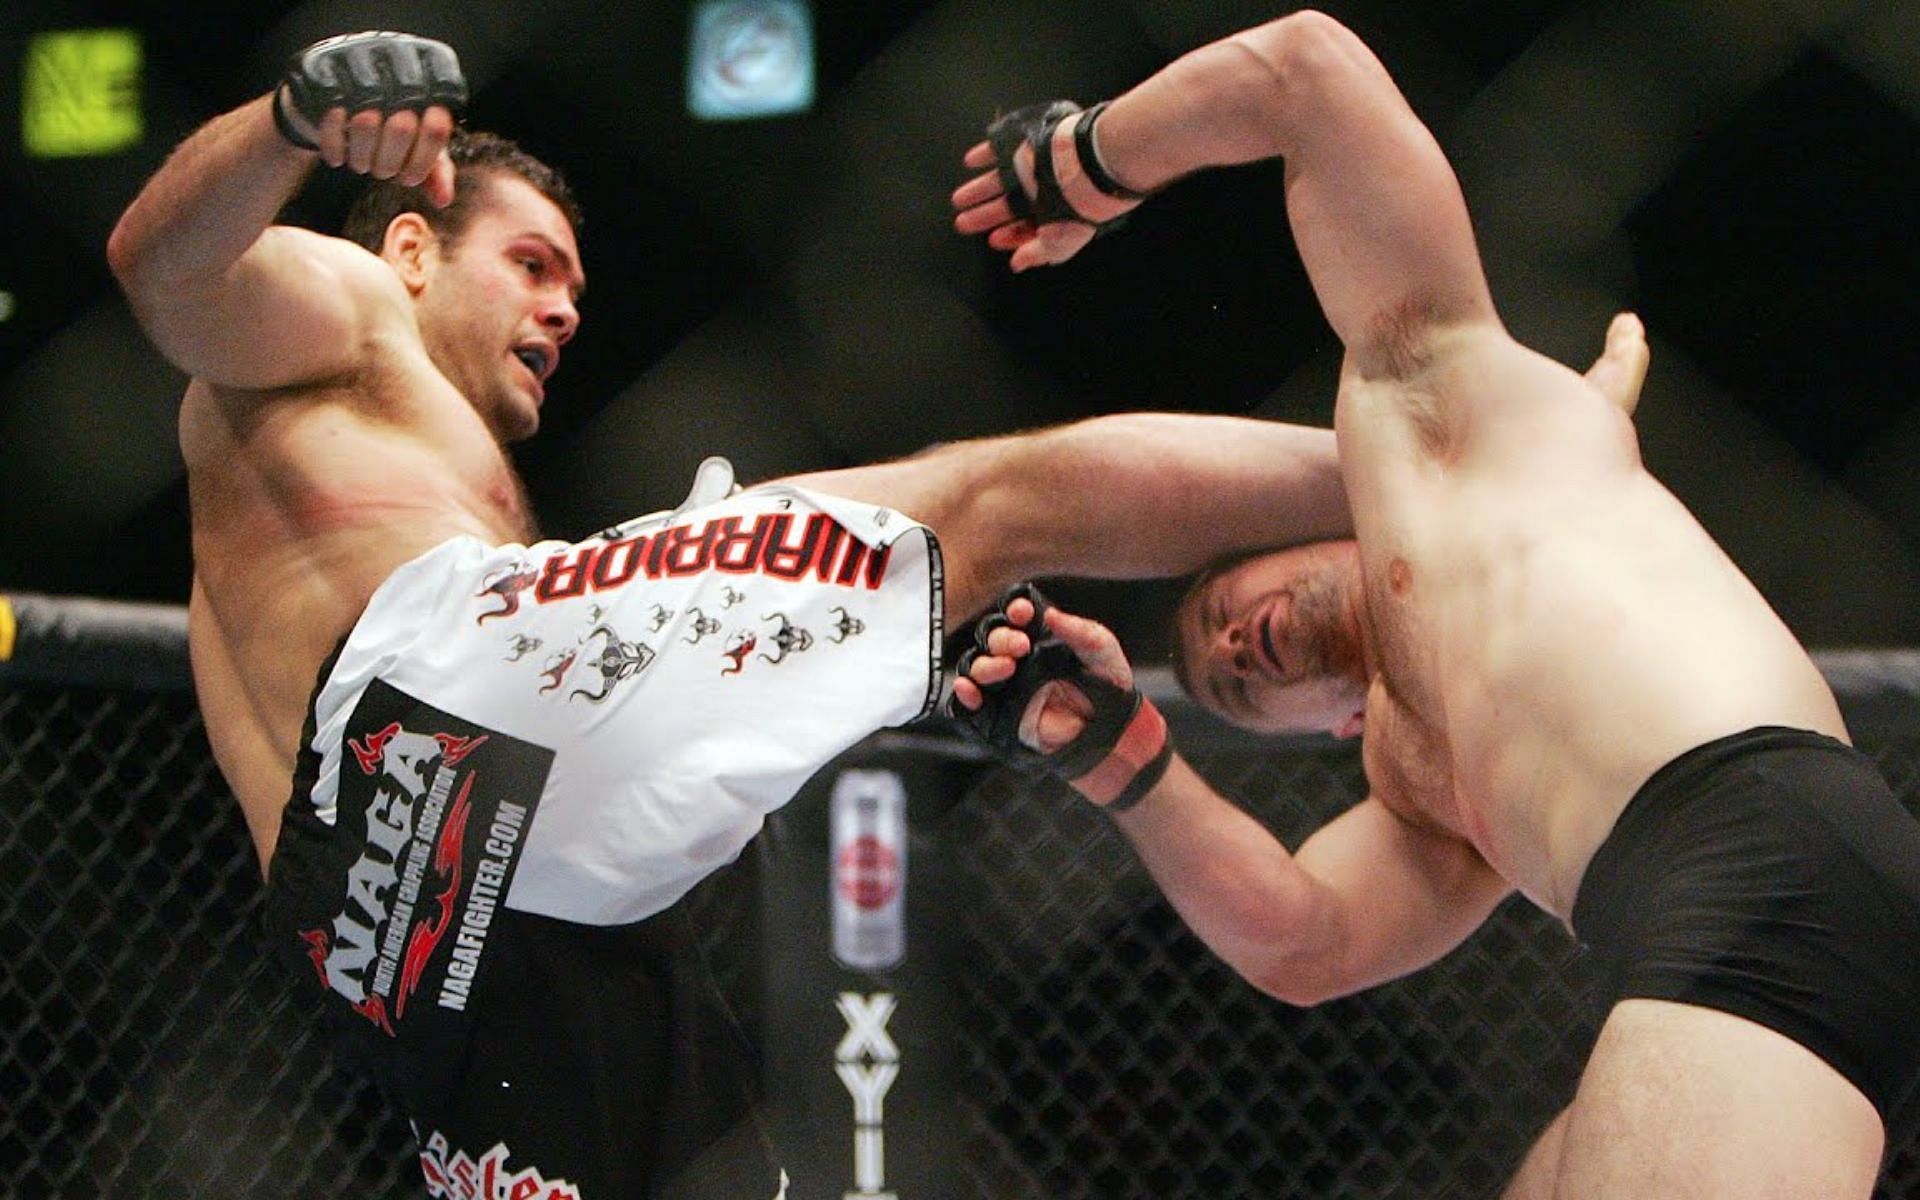 Mirko Cro Cop was given a taste of his own medicine by Gabriel Gonzaga in a truly ironic moment